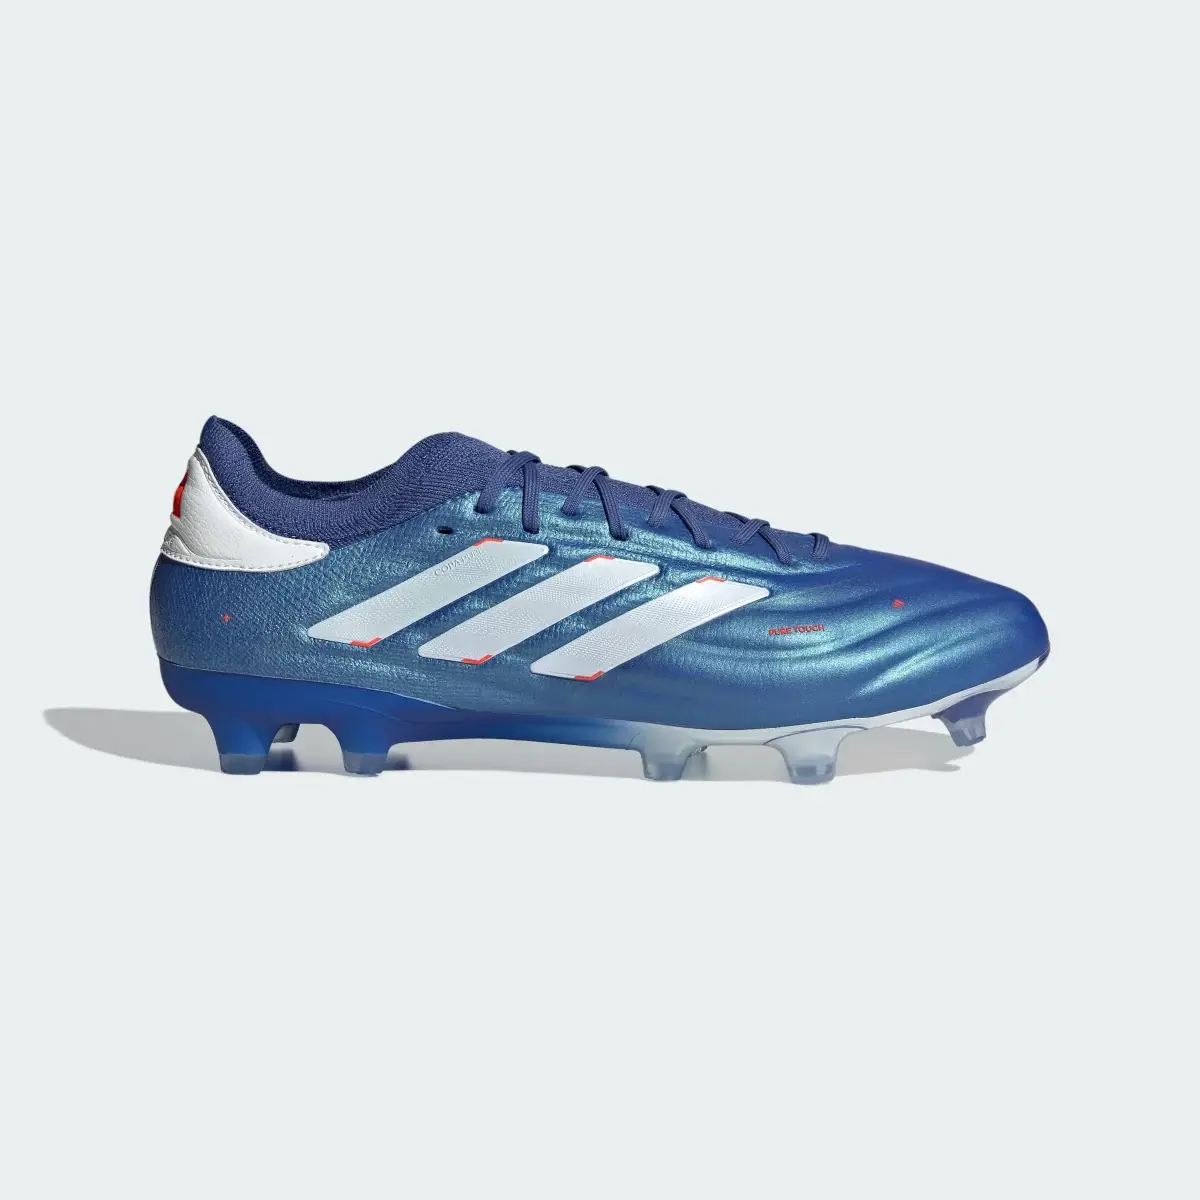 Adidas Copa Pure II+ Firm Ground Boots. 2